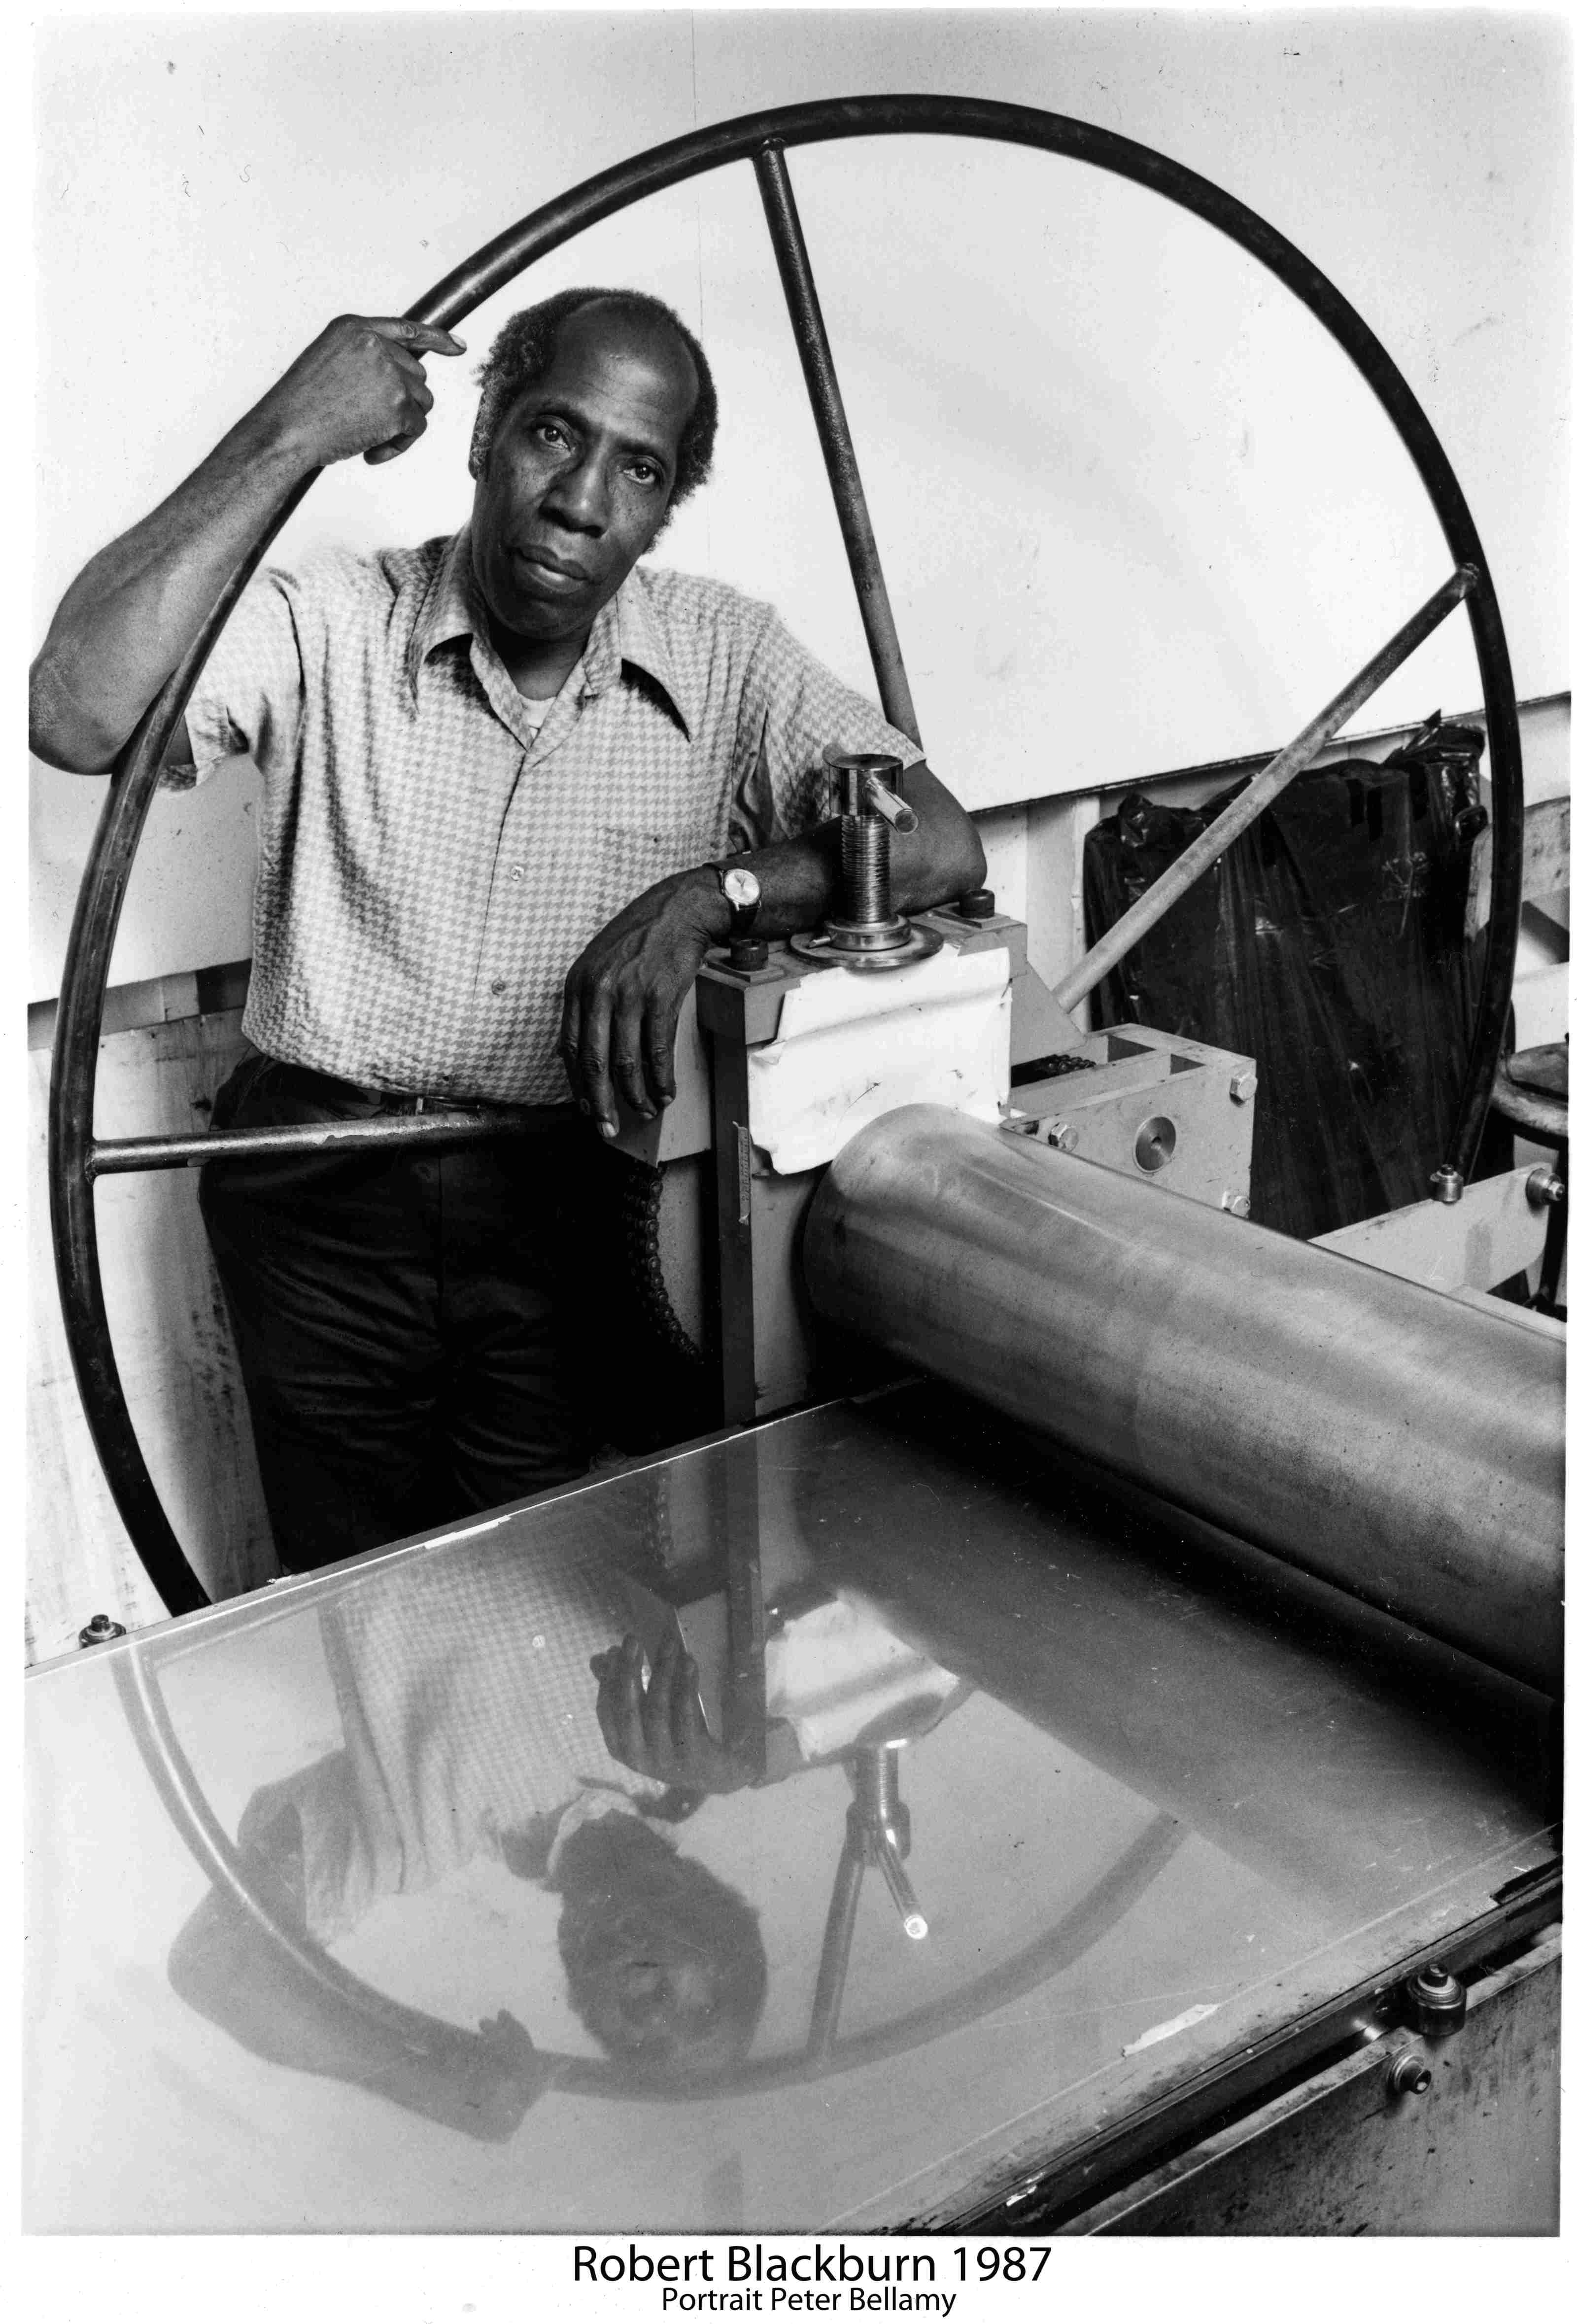 Artist and Master Printer Robert Blackburn stands by the wheel of a press in his workshop. Press image from the Smithsonian, courtesy of the Hyde Collection